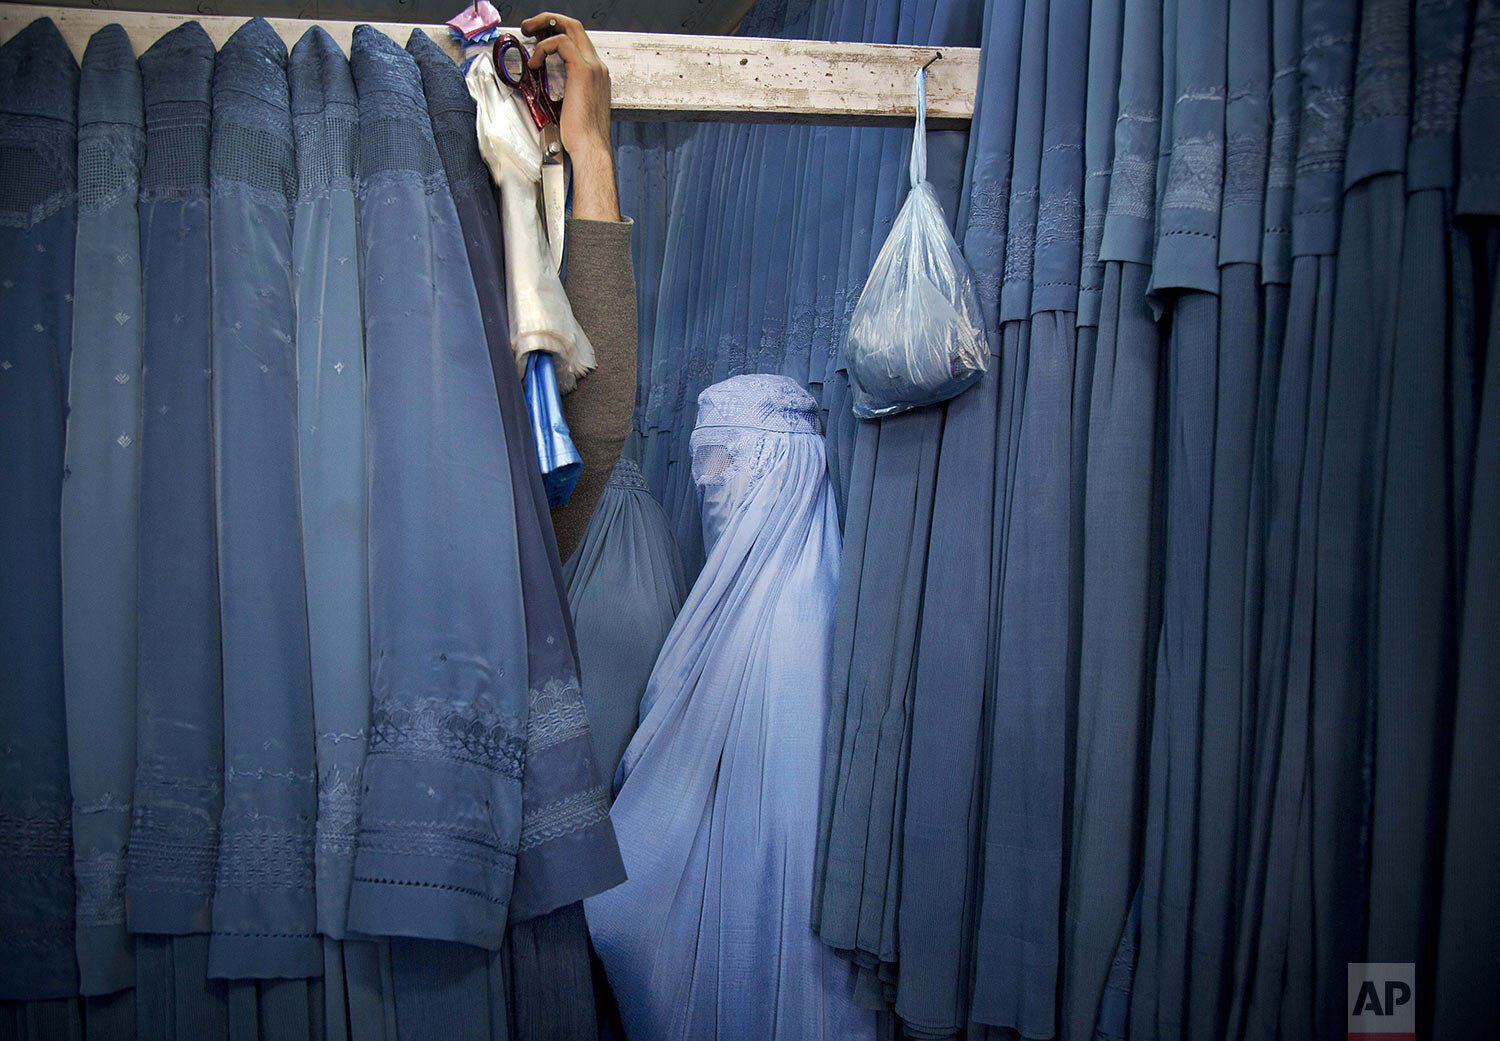  An Afghan woman waits in a changing room to try out a new Burqa, in a shop in the old city of Kabul, Afghanistan, Thursday, April 11, 2013. Before the Taliban took power in Afghanistan, the Burqa was infrequently worn in cities. While they were in p